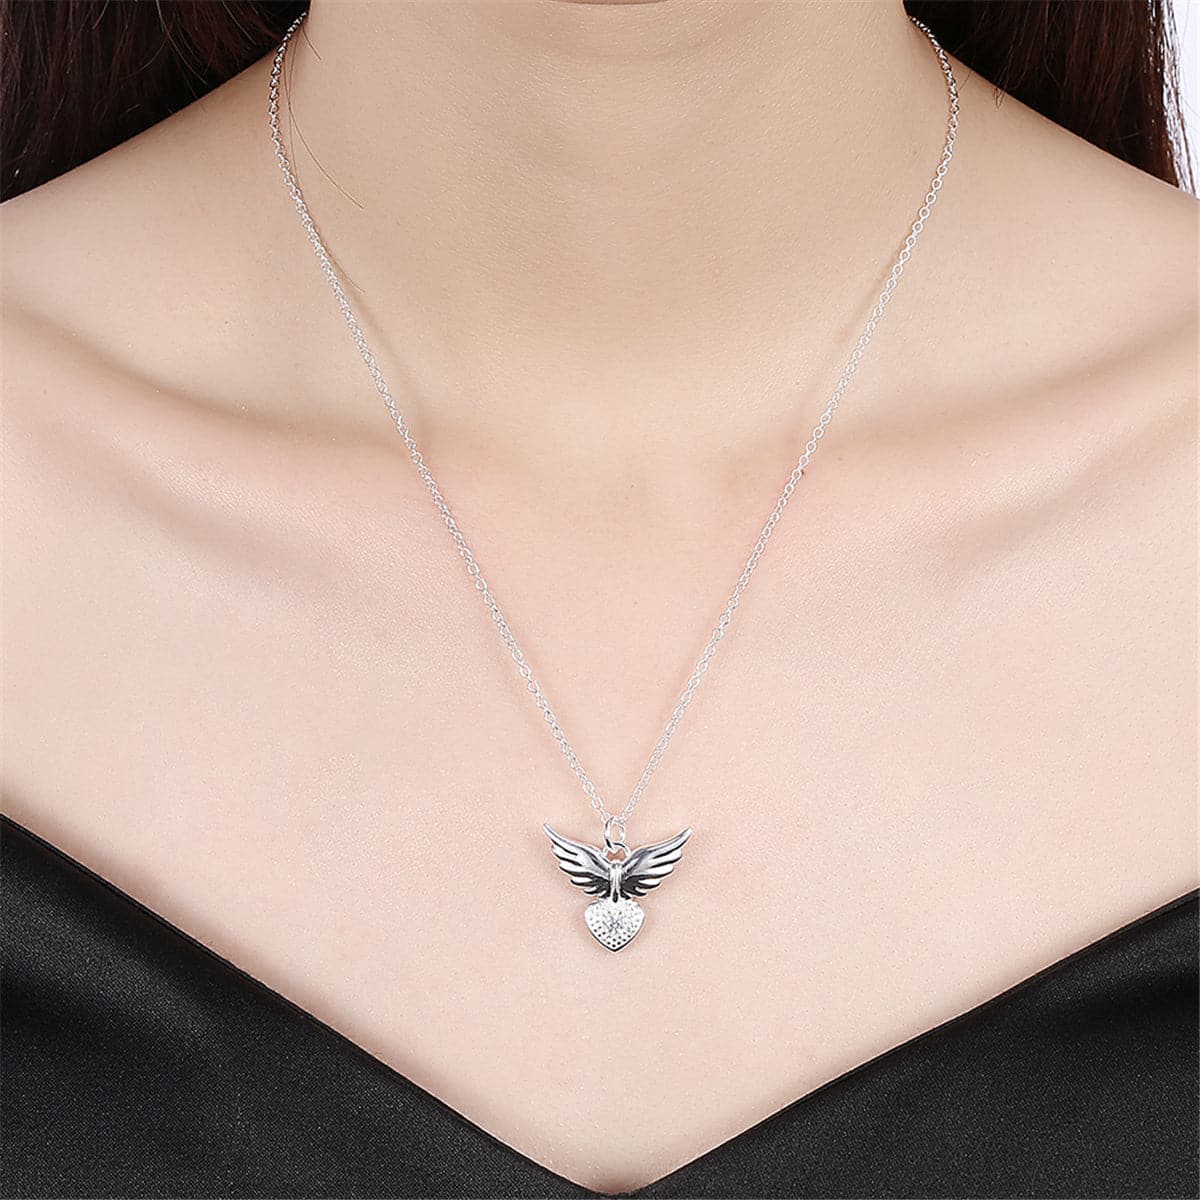 cubic zirconia & Silver-Plated Flying Heart Pendant Necklace - streetregion